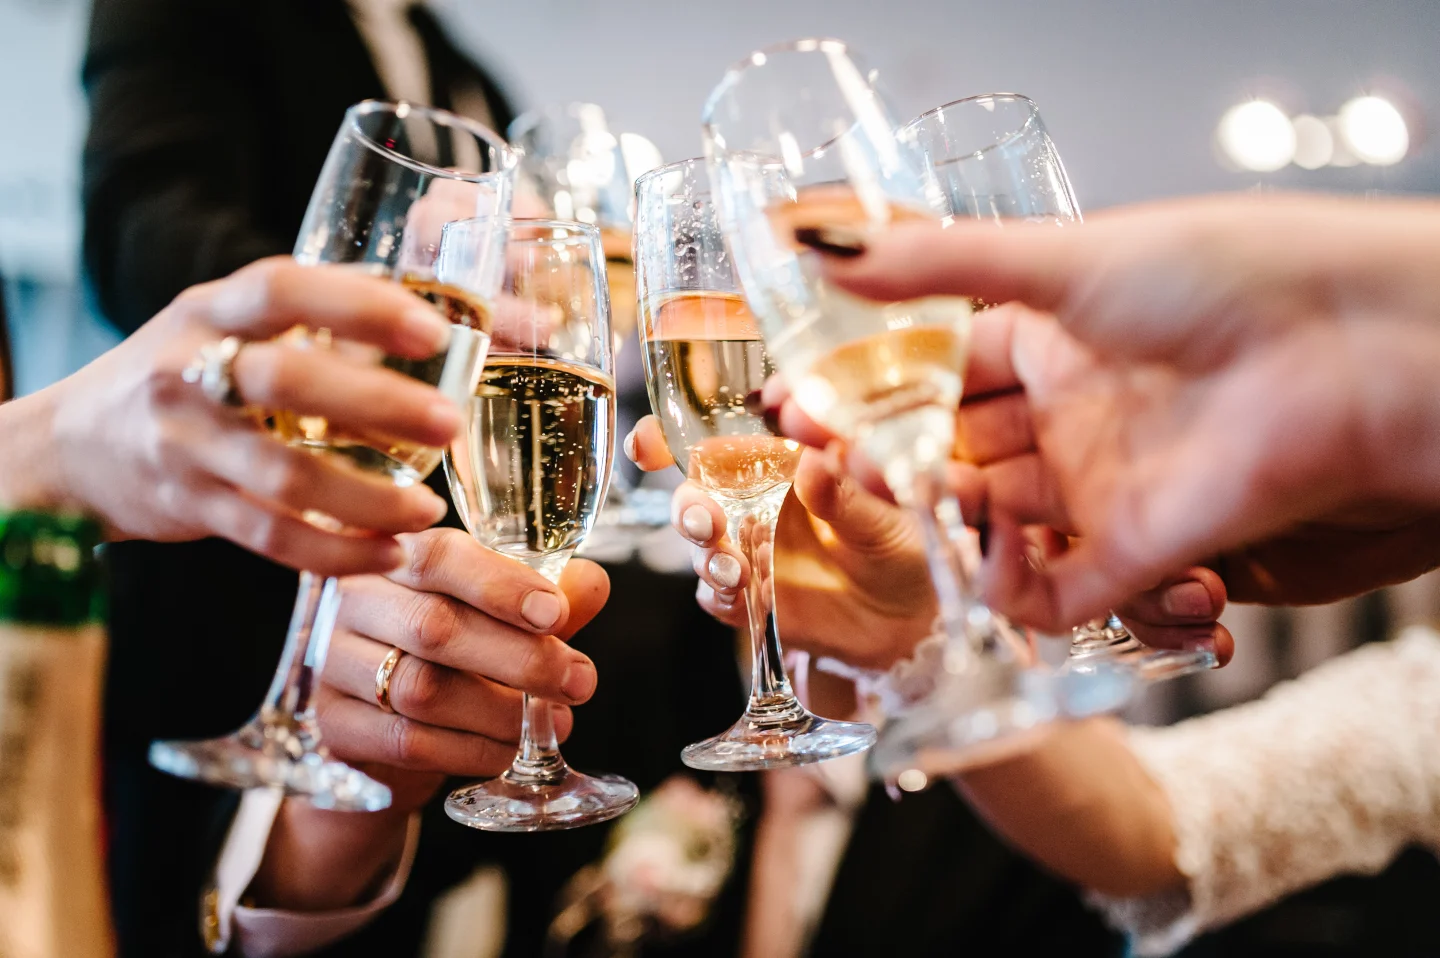 people-celebrating-a-happy-event-clinking-glasses-of-champagnehands-picture-id1061681850